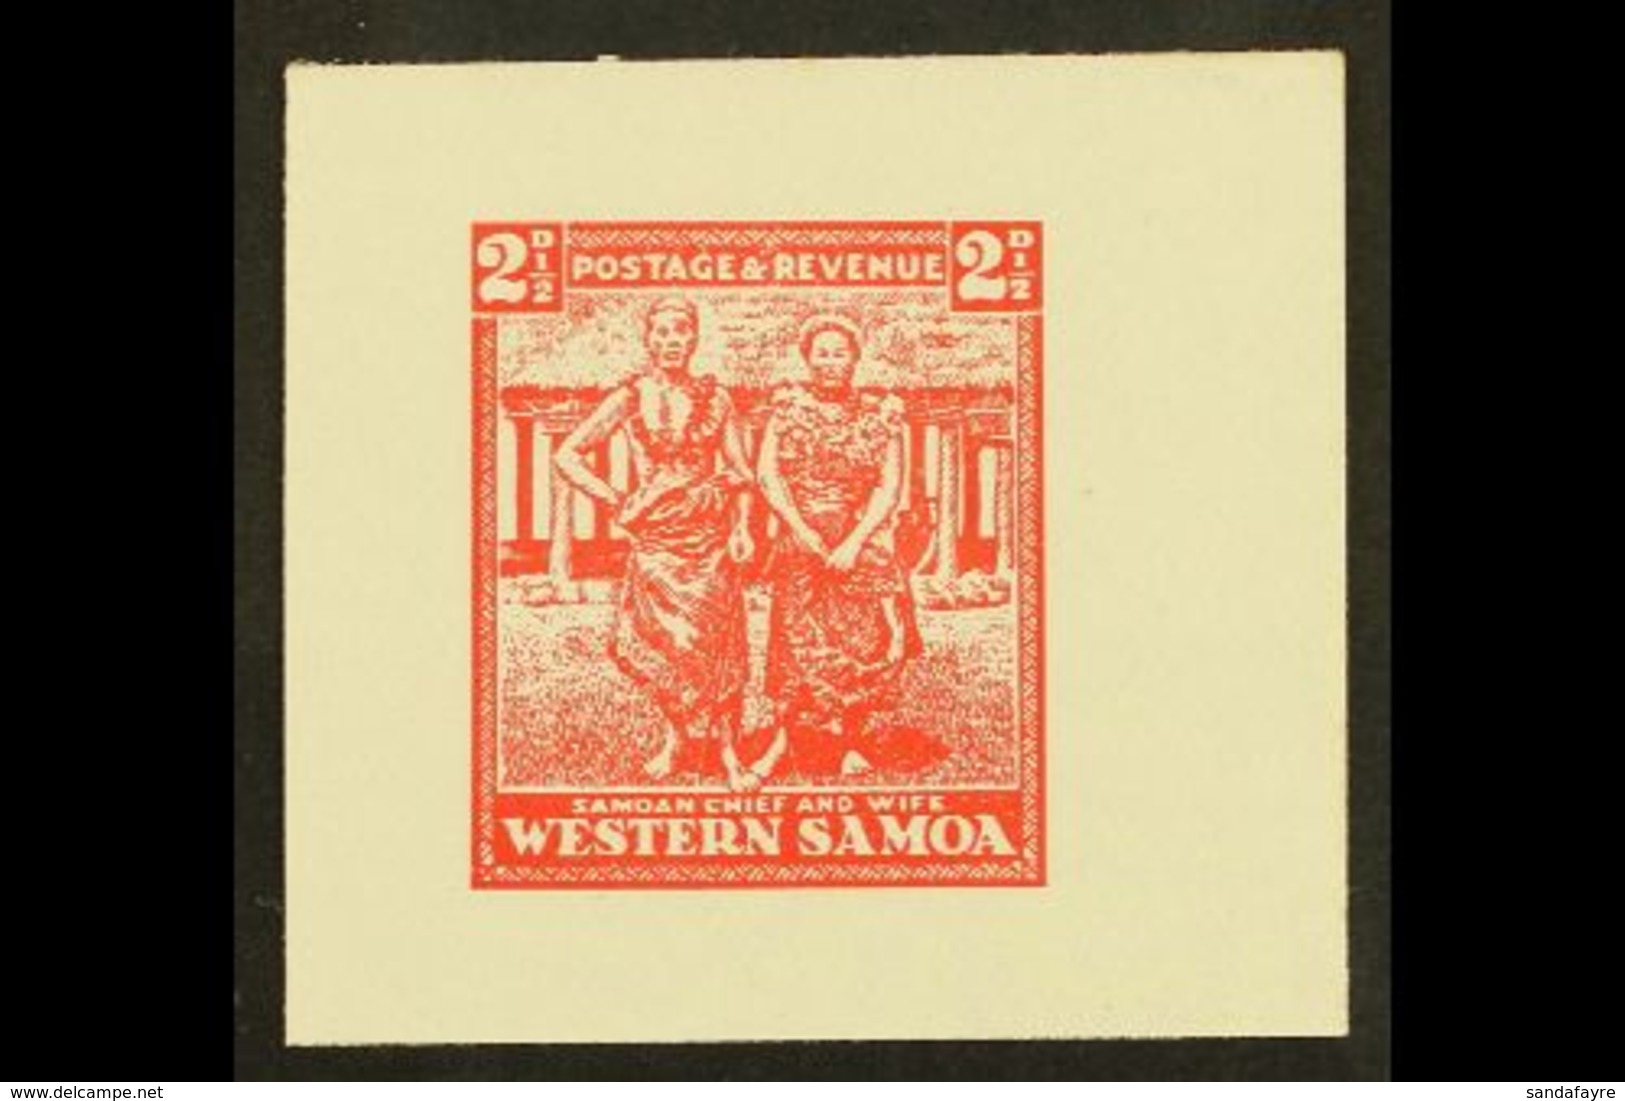 1935 PICTORIAL DEFINITIVE ESSAY Collins Essay For The 2½d Value In Red On Thick White Paper, The "Chief And Wife" Design - Samoa